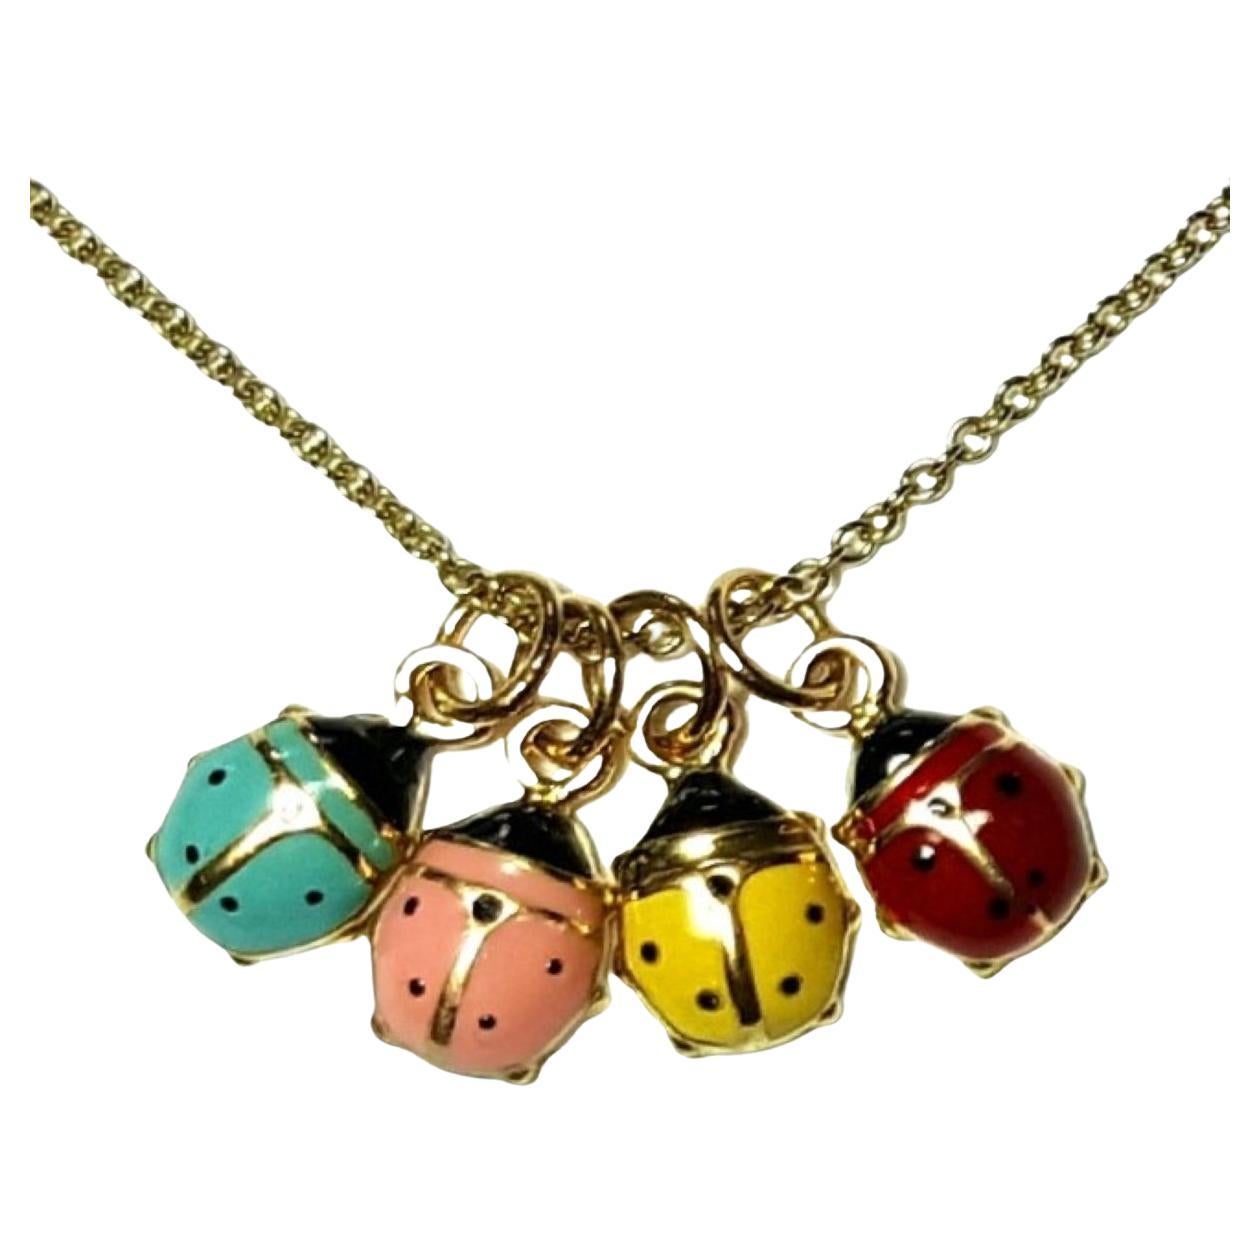 Originally I made a full drop Necklace with these adorable Ladybugs for my young daughter, but she preferred a single charm in Pink. Since daughters rule, I decided to offer single charms without a chain for affordable 18K jewelry simplified that